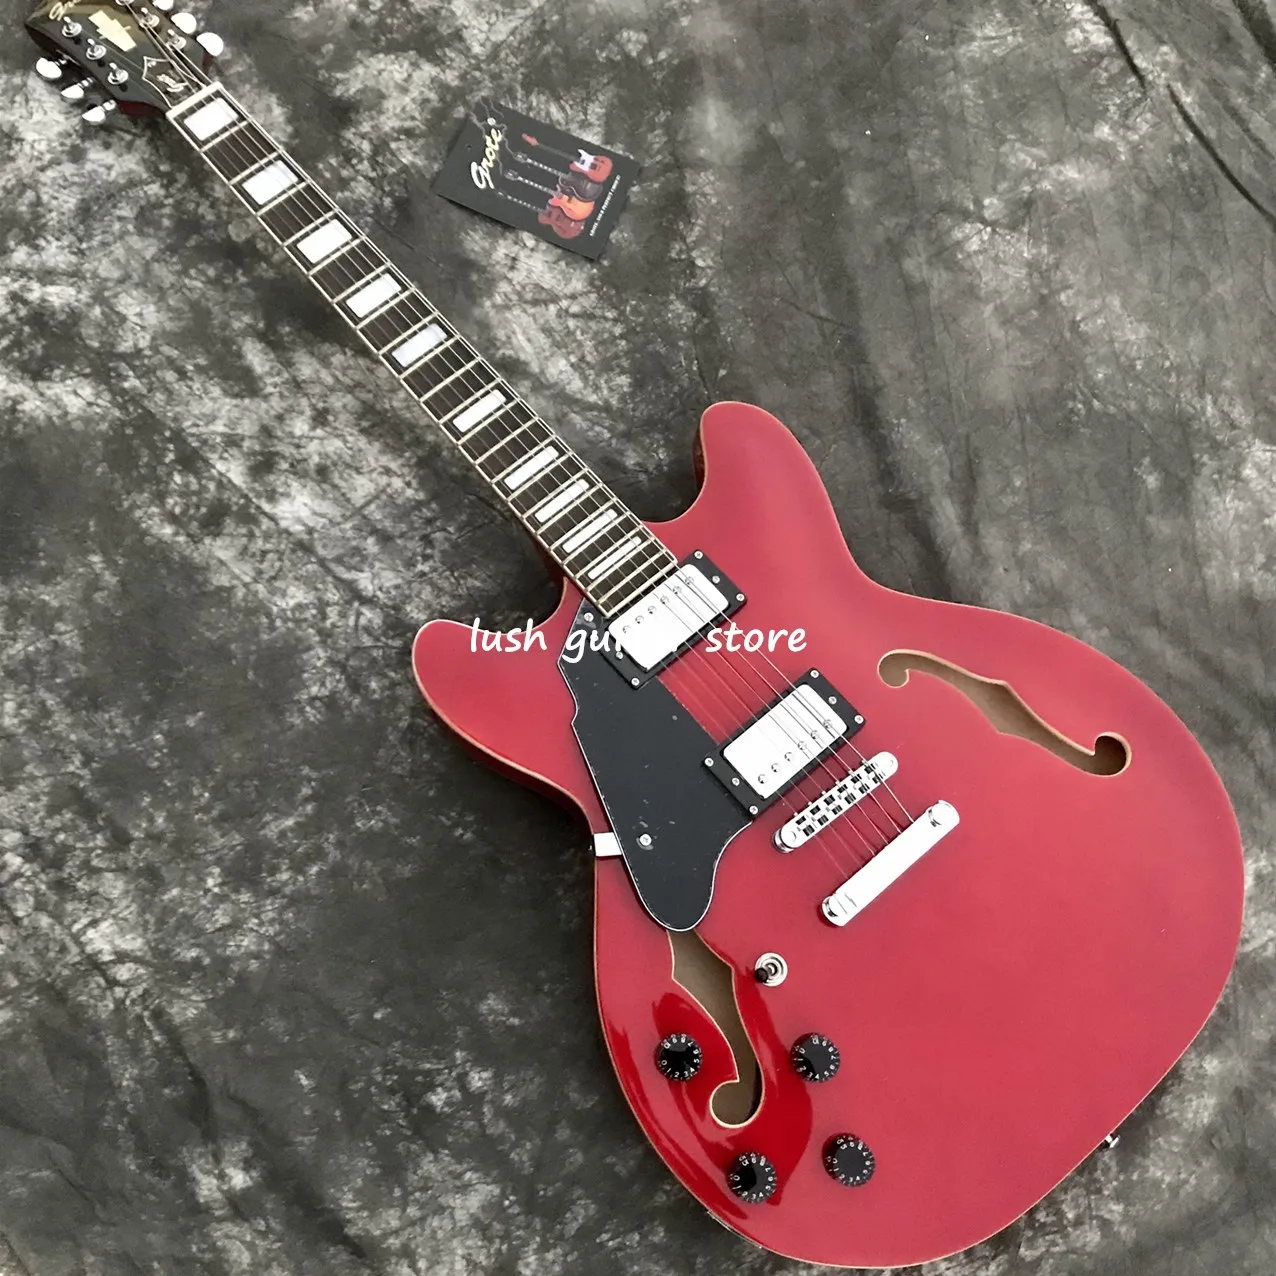 

Grote Lefthand Jazz Electric Guitar,China Red Semi-Hollow Body,Black Pickguard Guitarra,Free Shipping